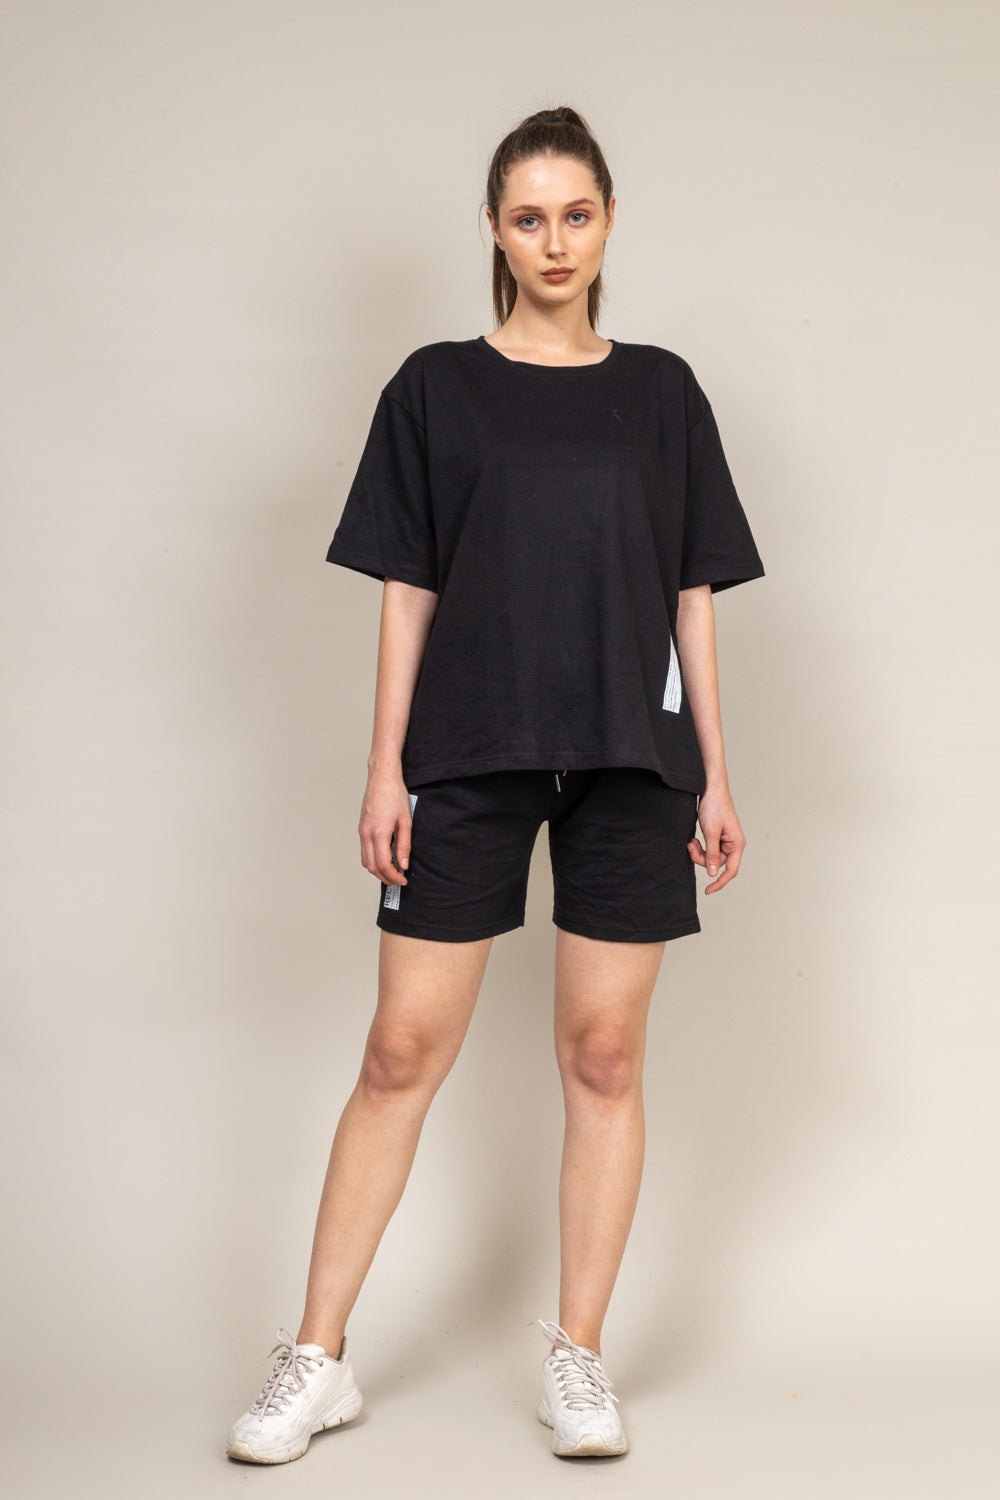 Midnight Black Oversized T-shirt Shorts Co-Ord – Oneforblue